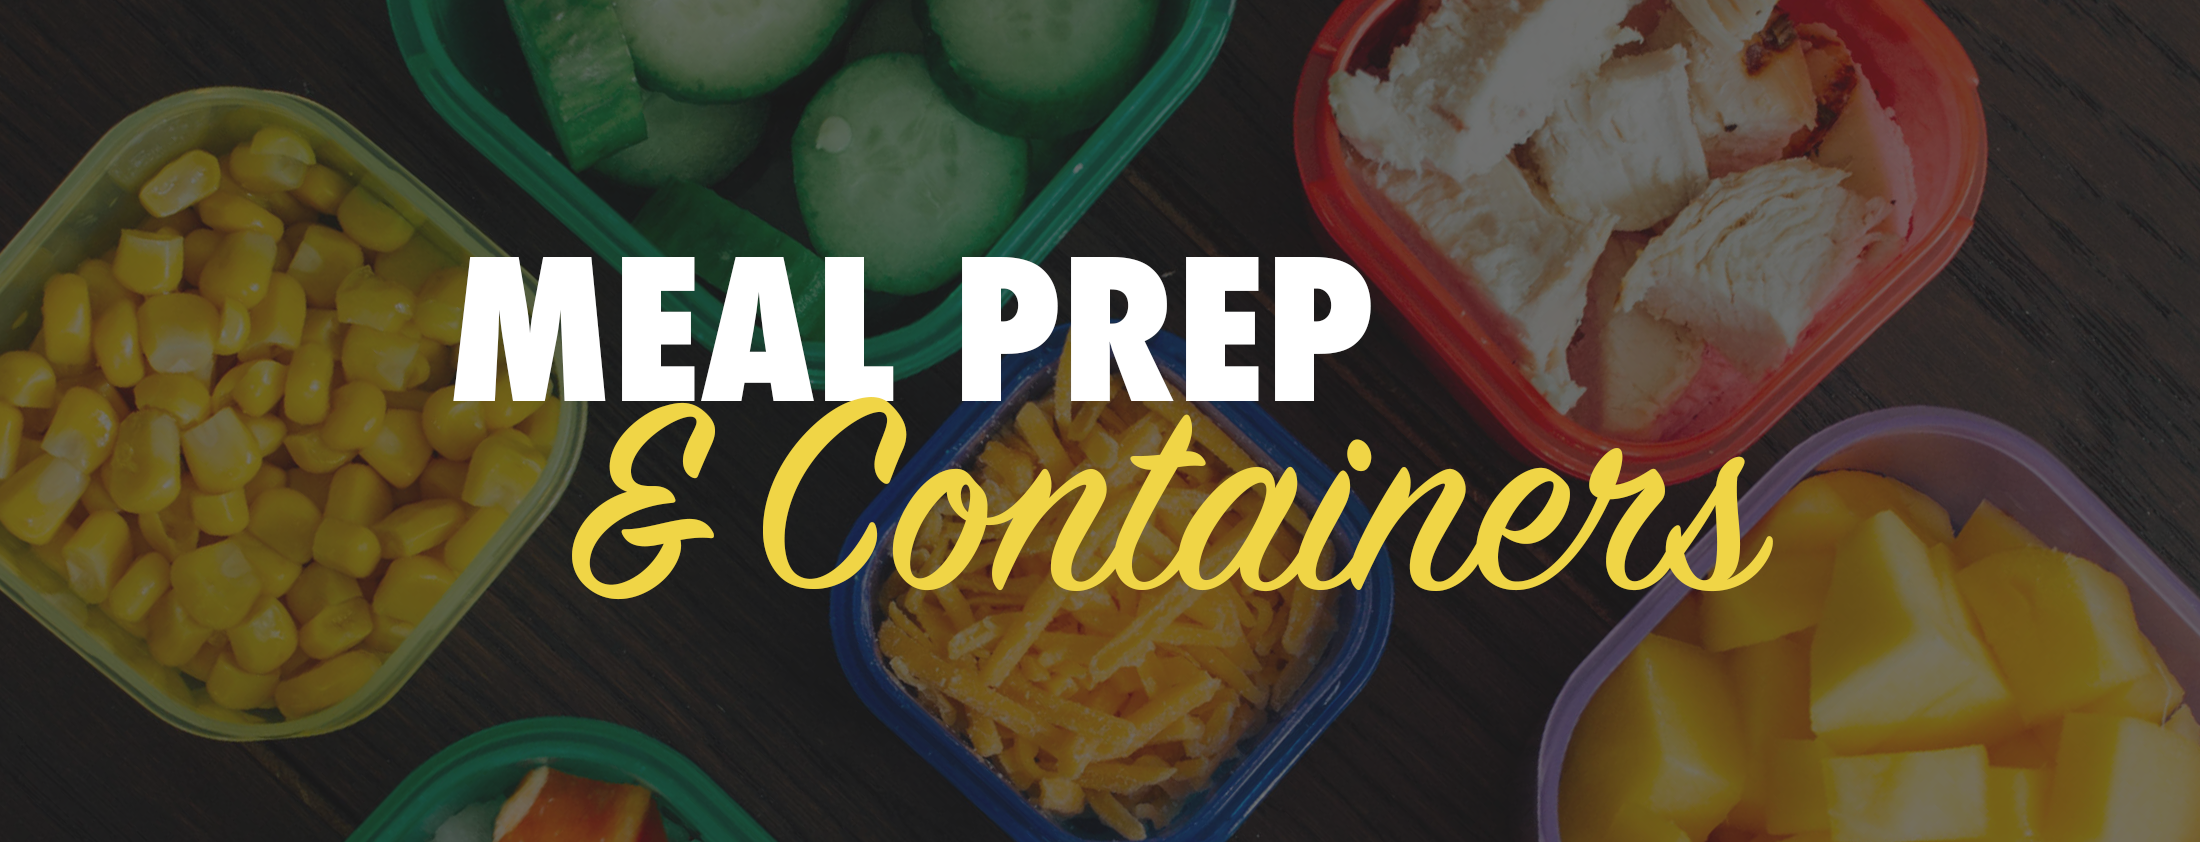 meal prep, 21 day fix, meal prep container guide 21 day fix